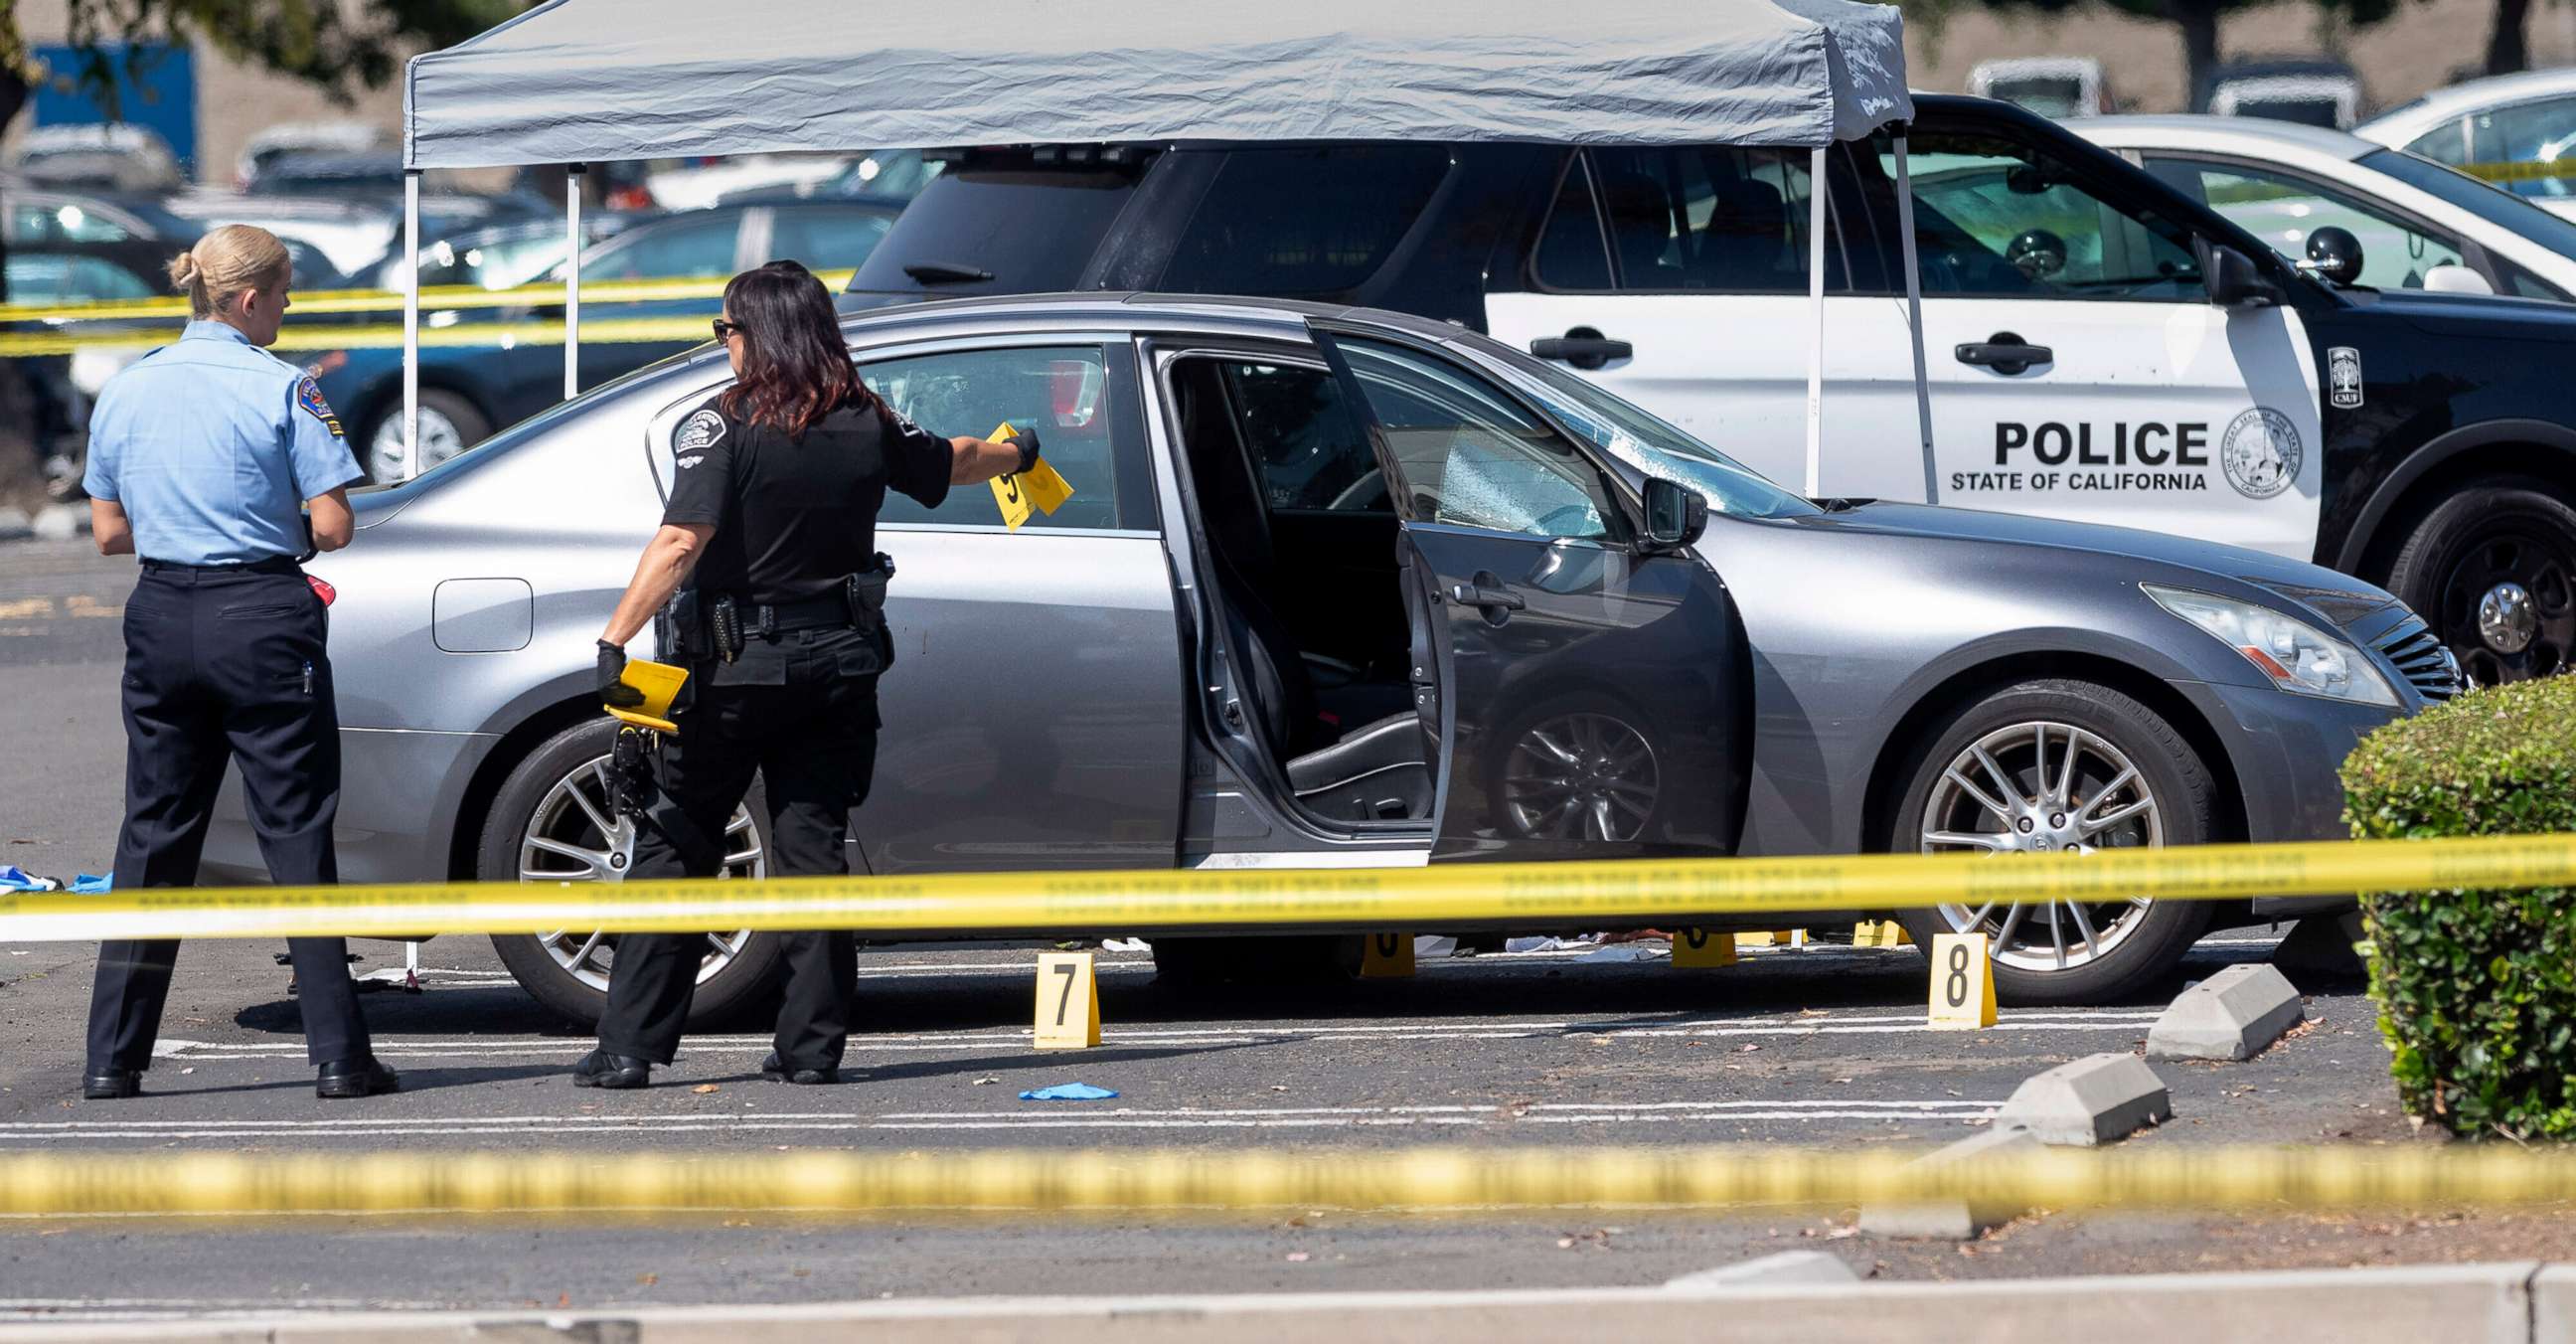 PHOTO: Police investigate a car where a retired Cal State Fullerton administrator was stabbed to death, Aug. 19, 2019 in Fullerton, Calif.